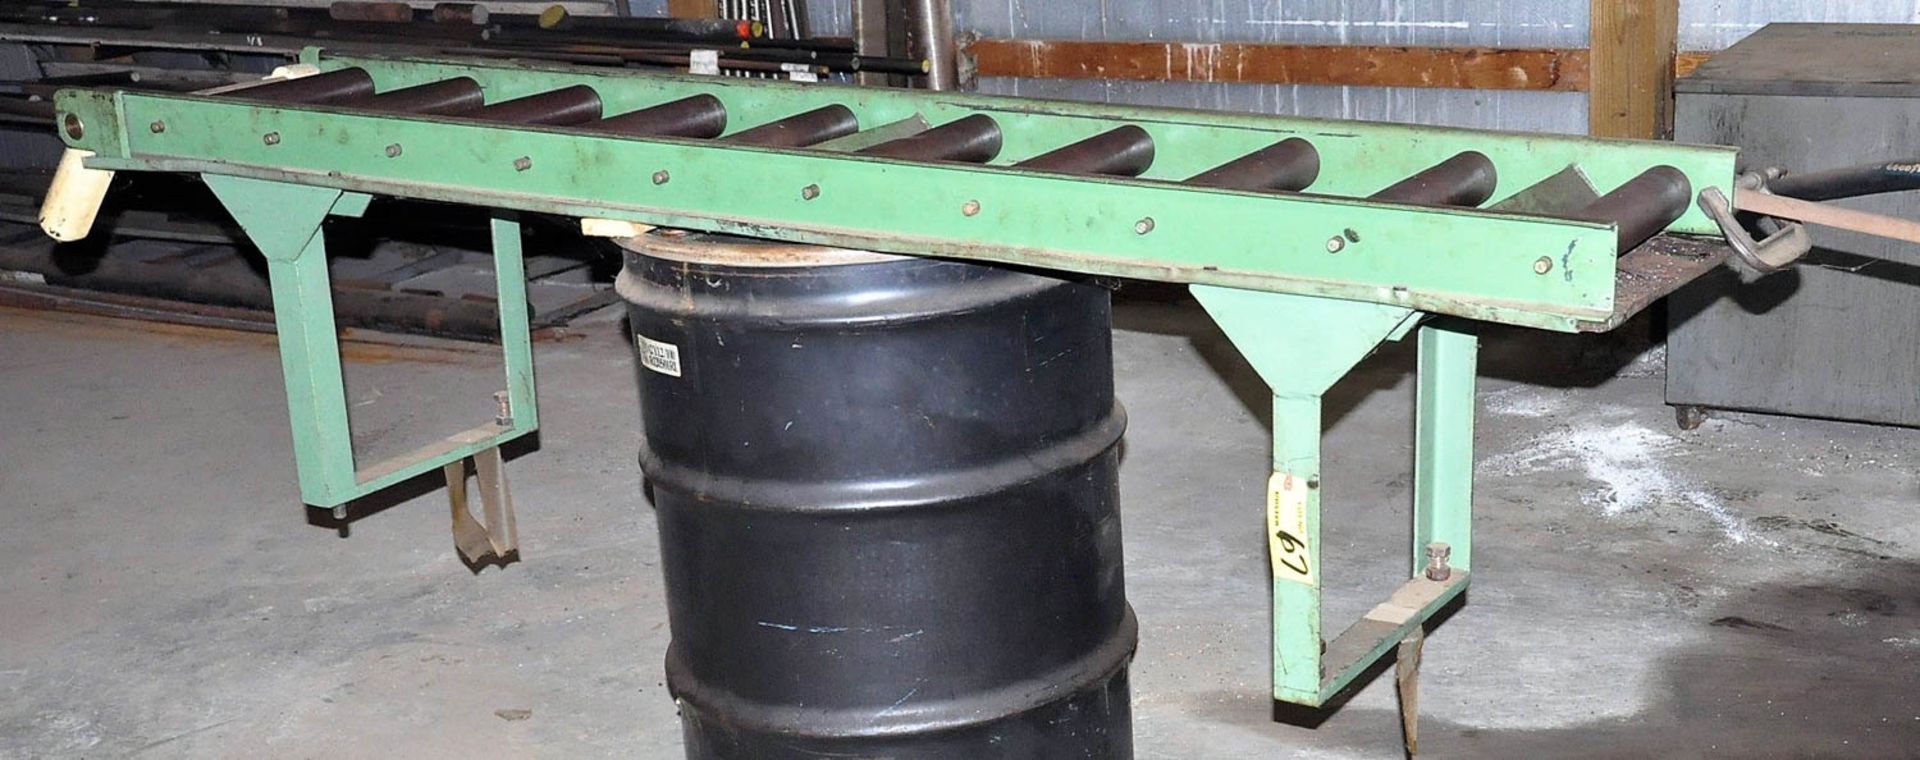 14" X 72" ROLLER FEED CONVEYOR, WITH LEGS (BACK ROOM)